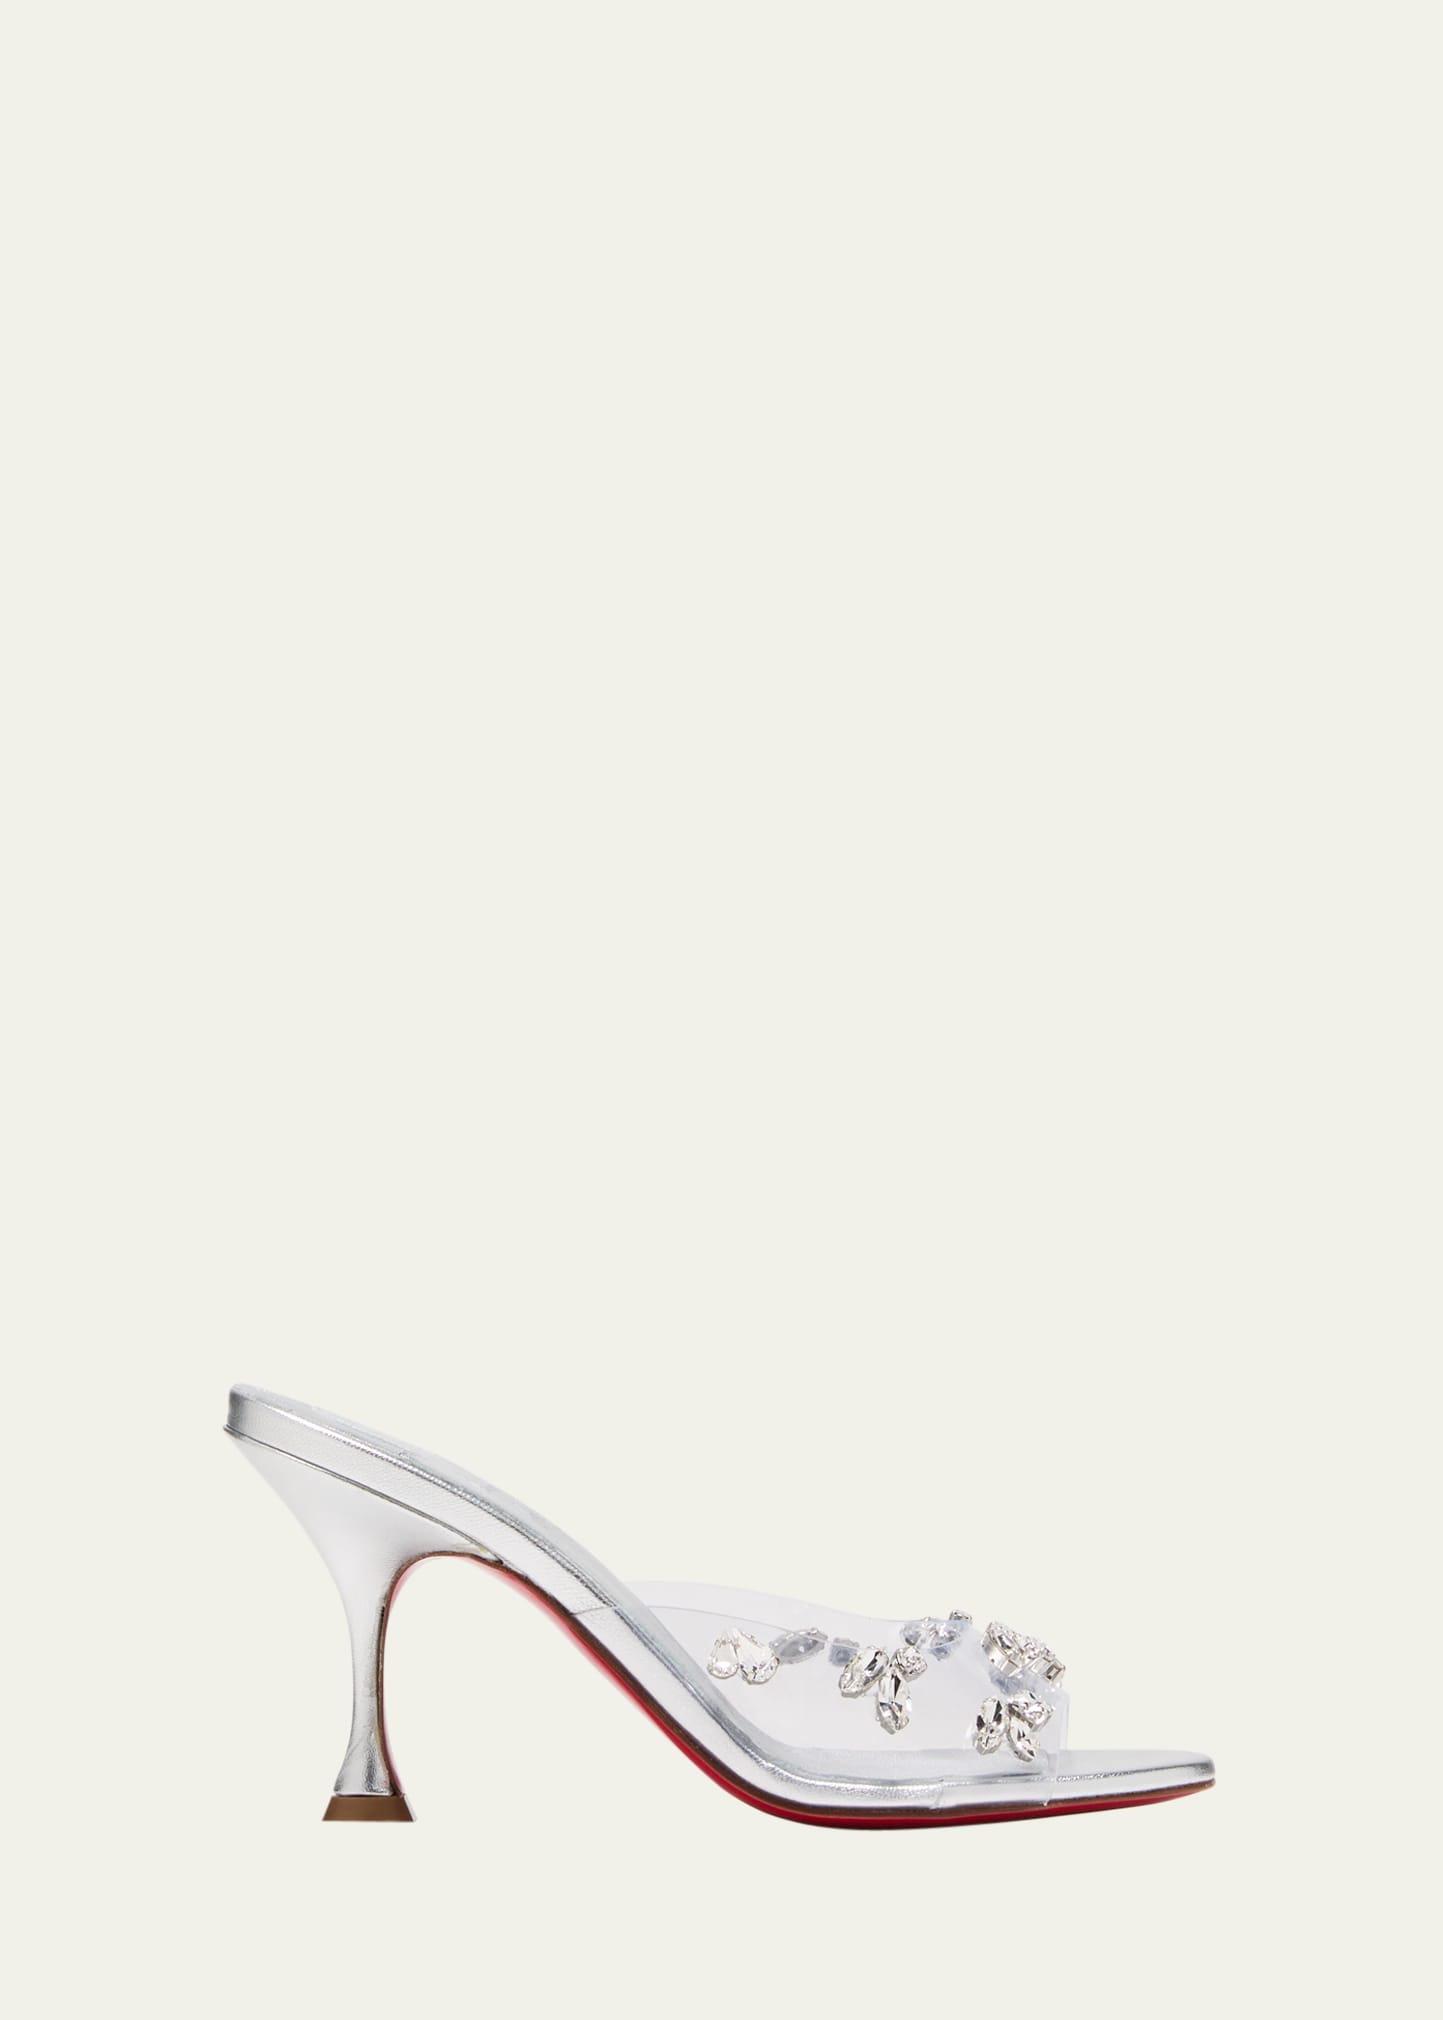 Degraqueen Crystal Transparent Red Sole Mule Sandals